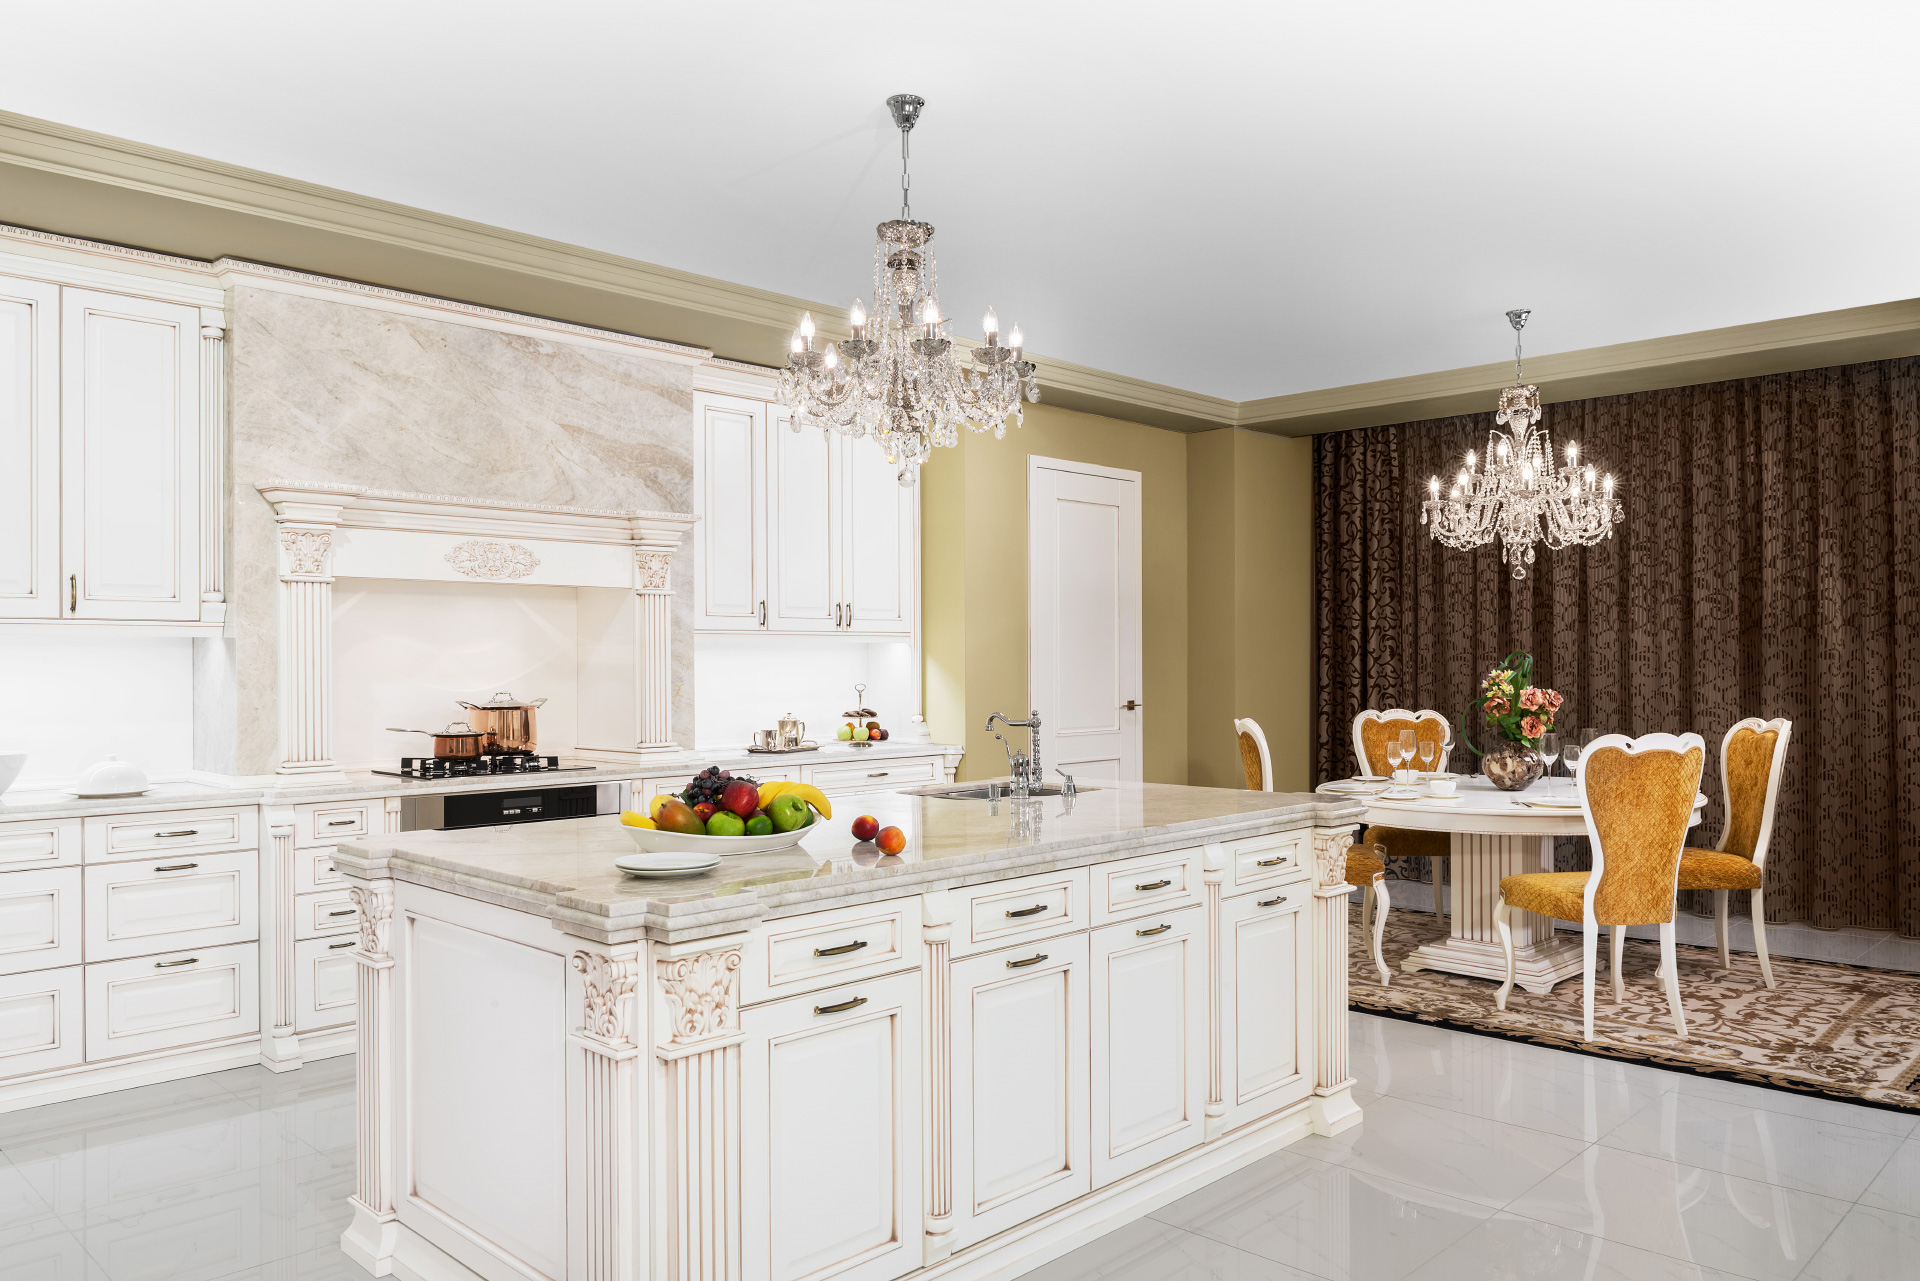 Elegant white Royal kitchen and characteristic highly ornate cornices and columns